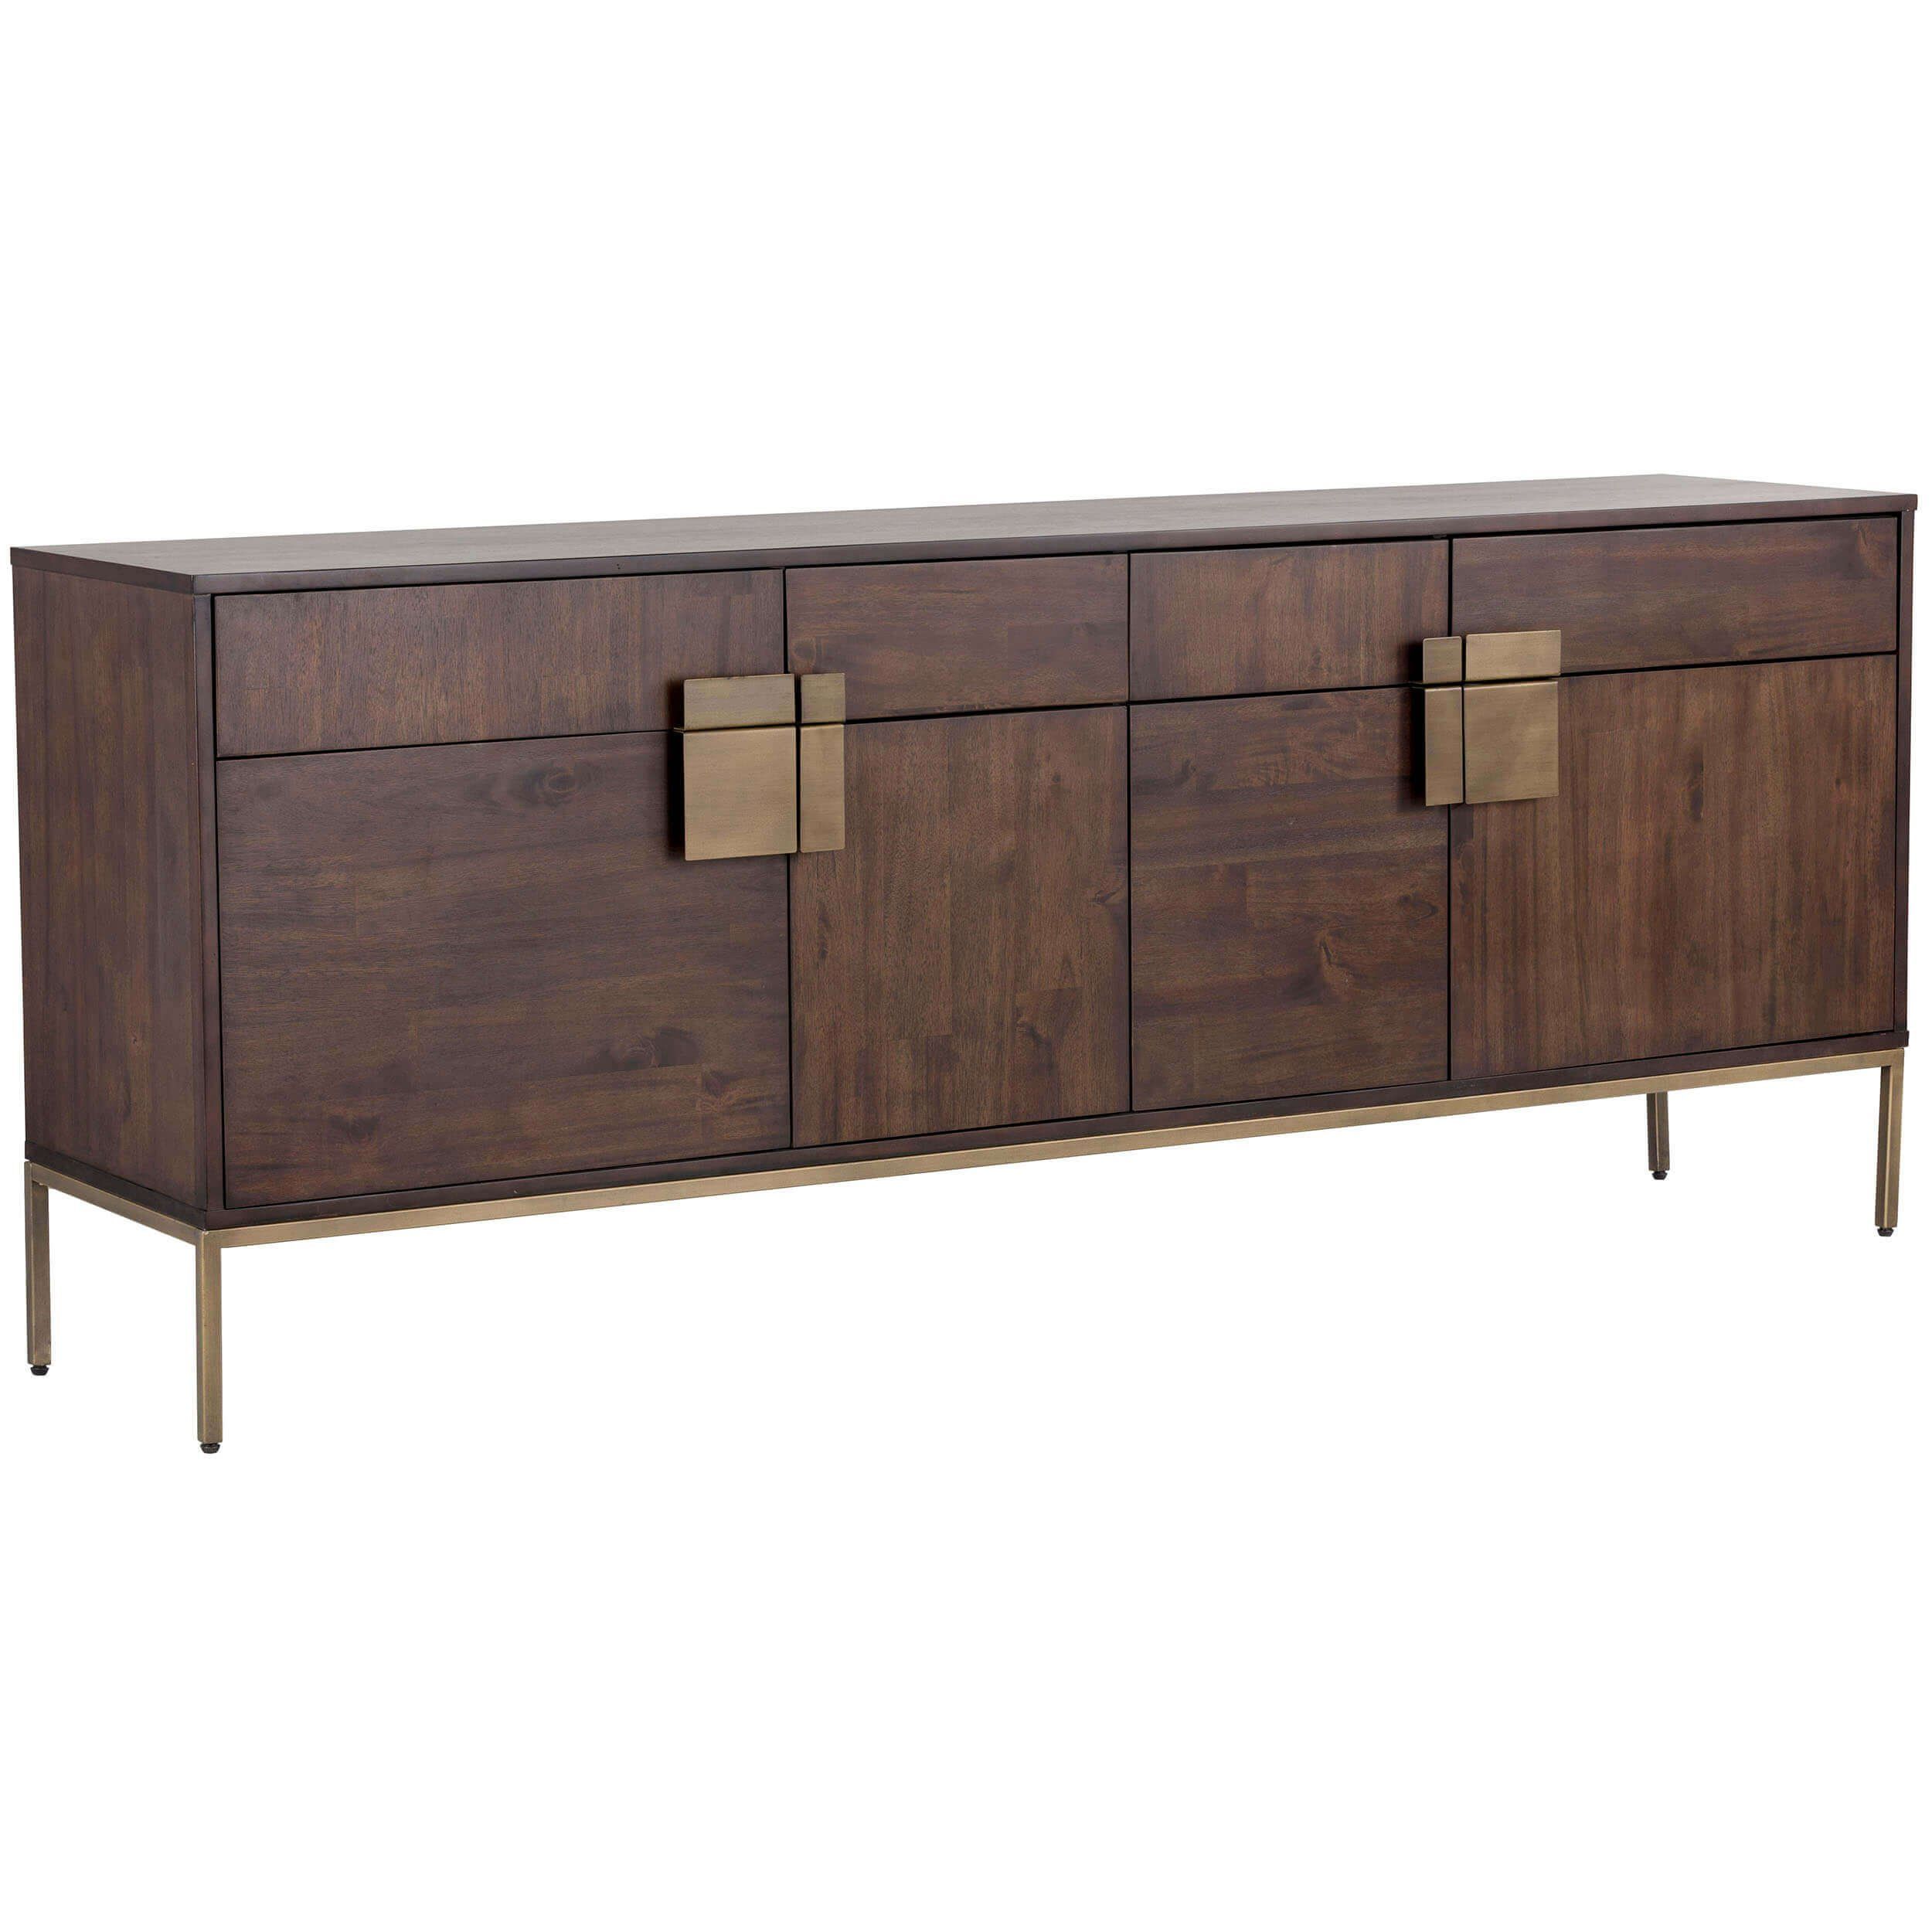 Jade Sideboard In 2019 | Furniture And Decor | Dining Room In Most Current Ruskin Sideboards (Photo 4 of 20)